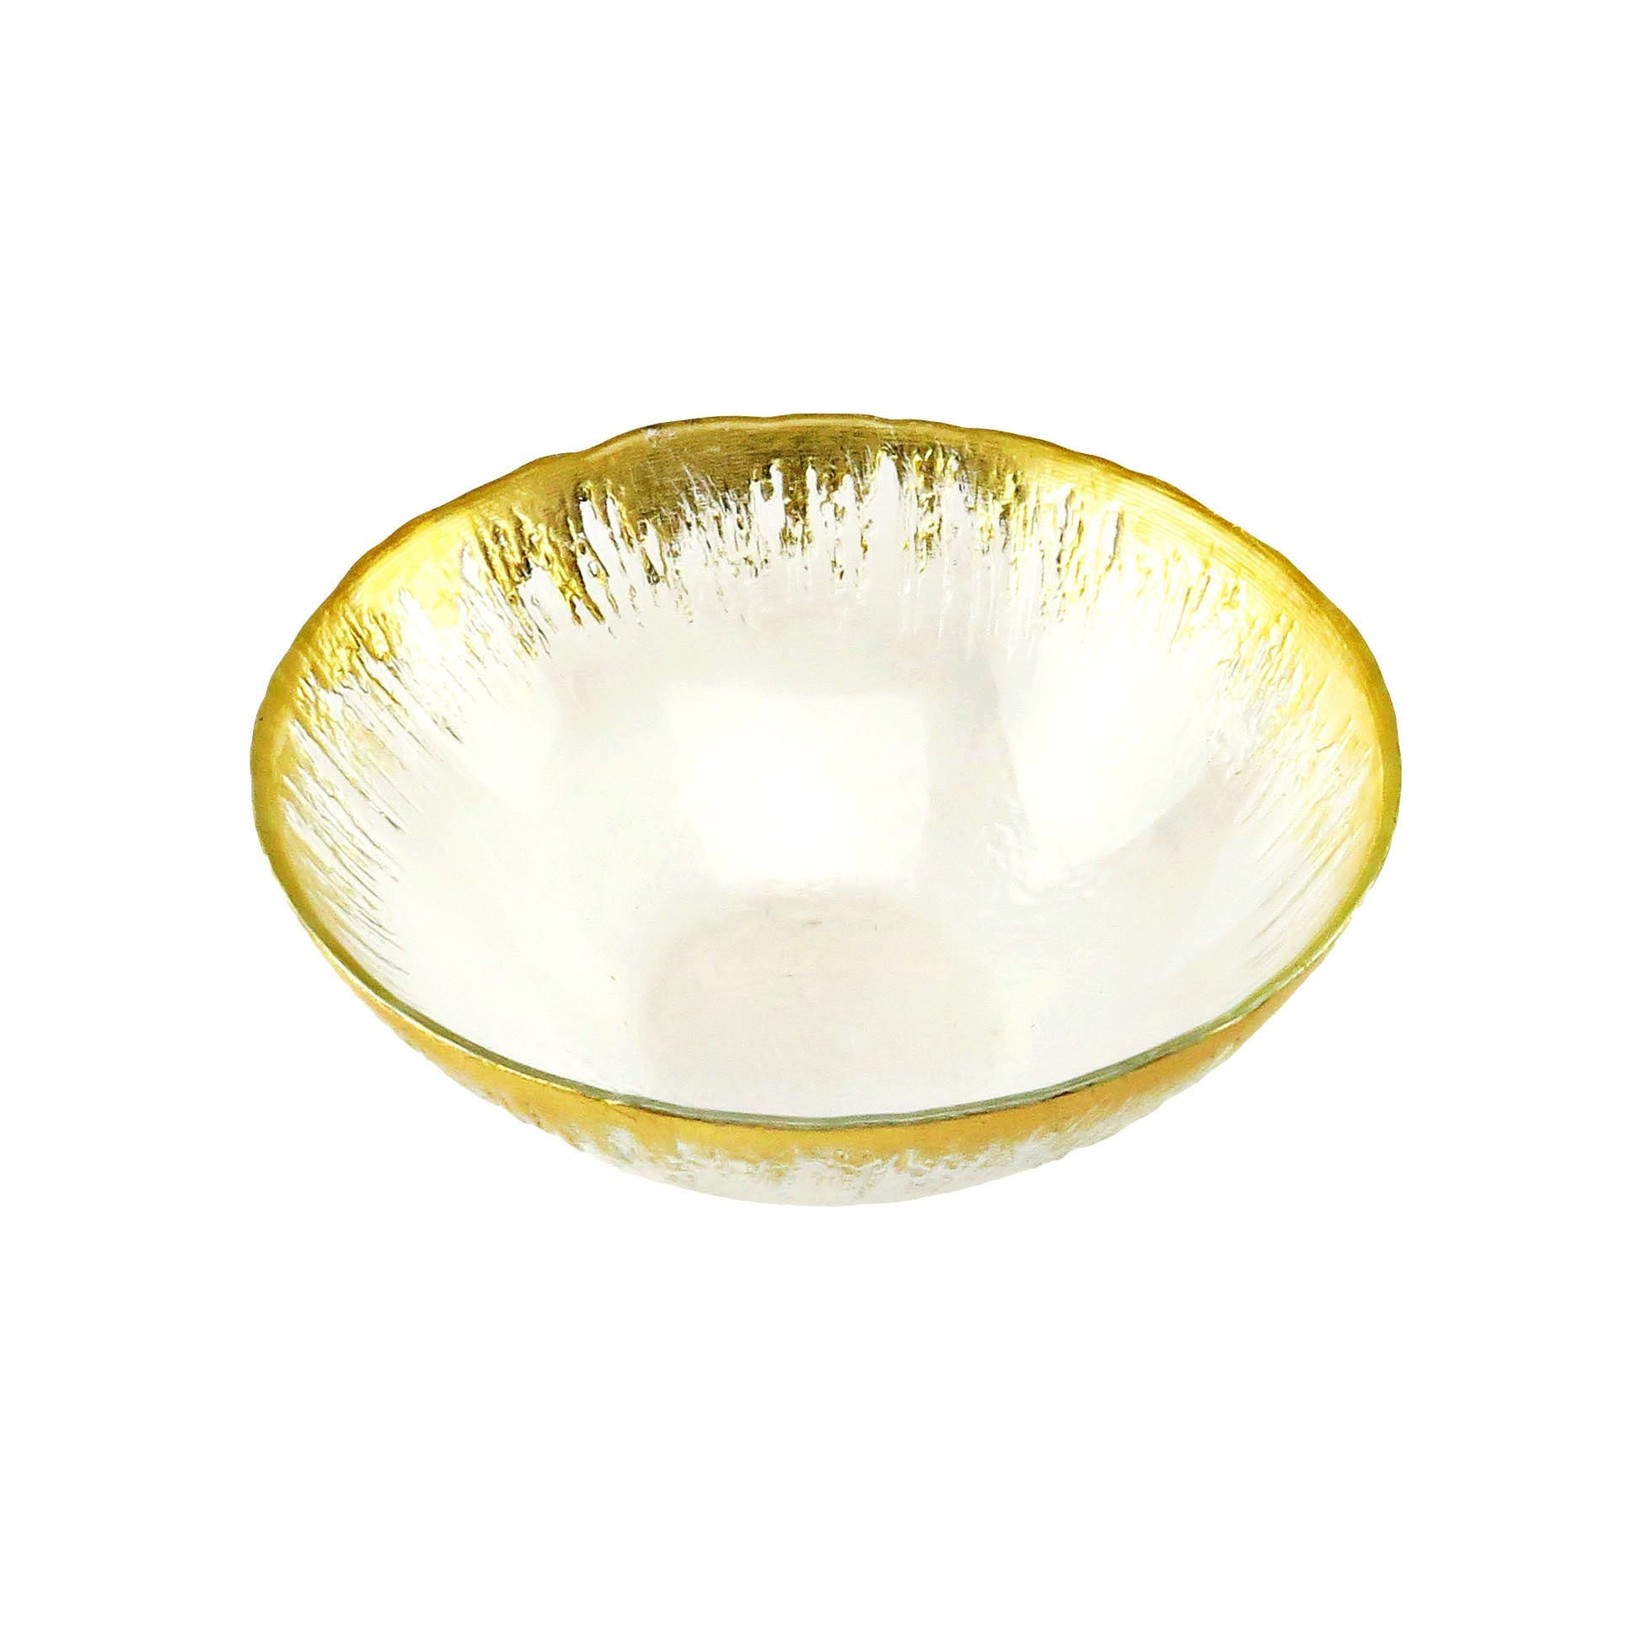 CB307 Individual Bowls with Flashy Silver Design - 6.75"D